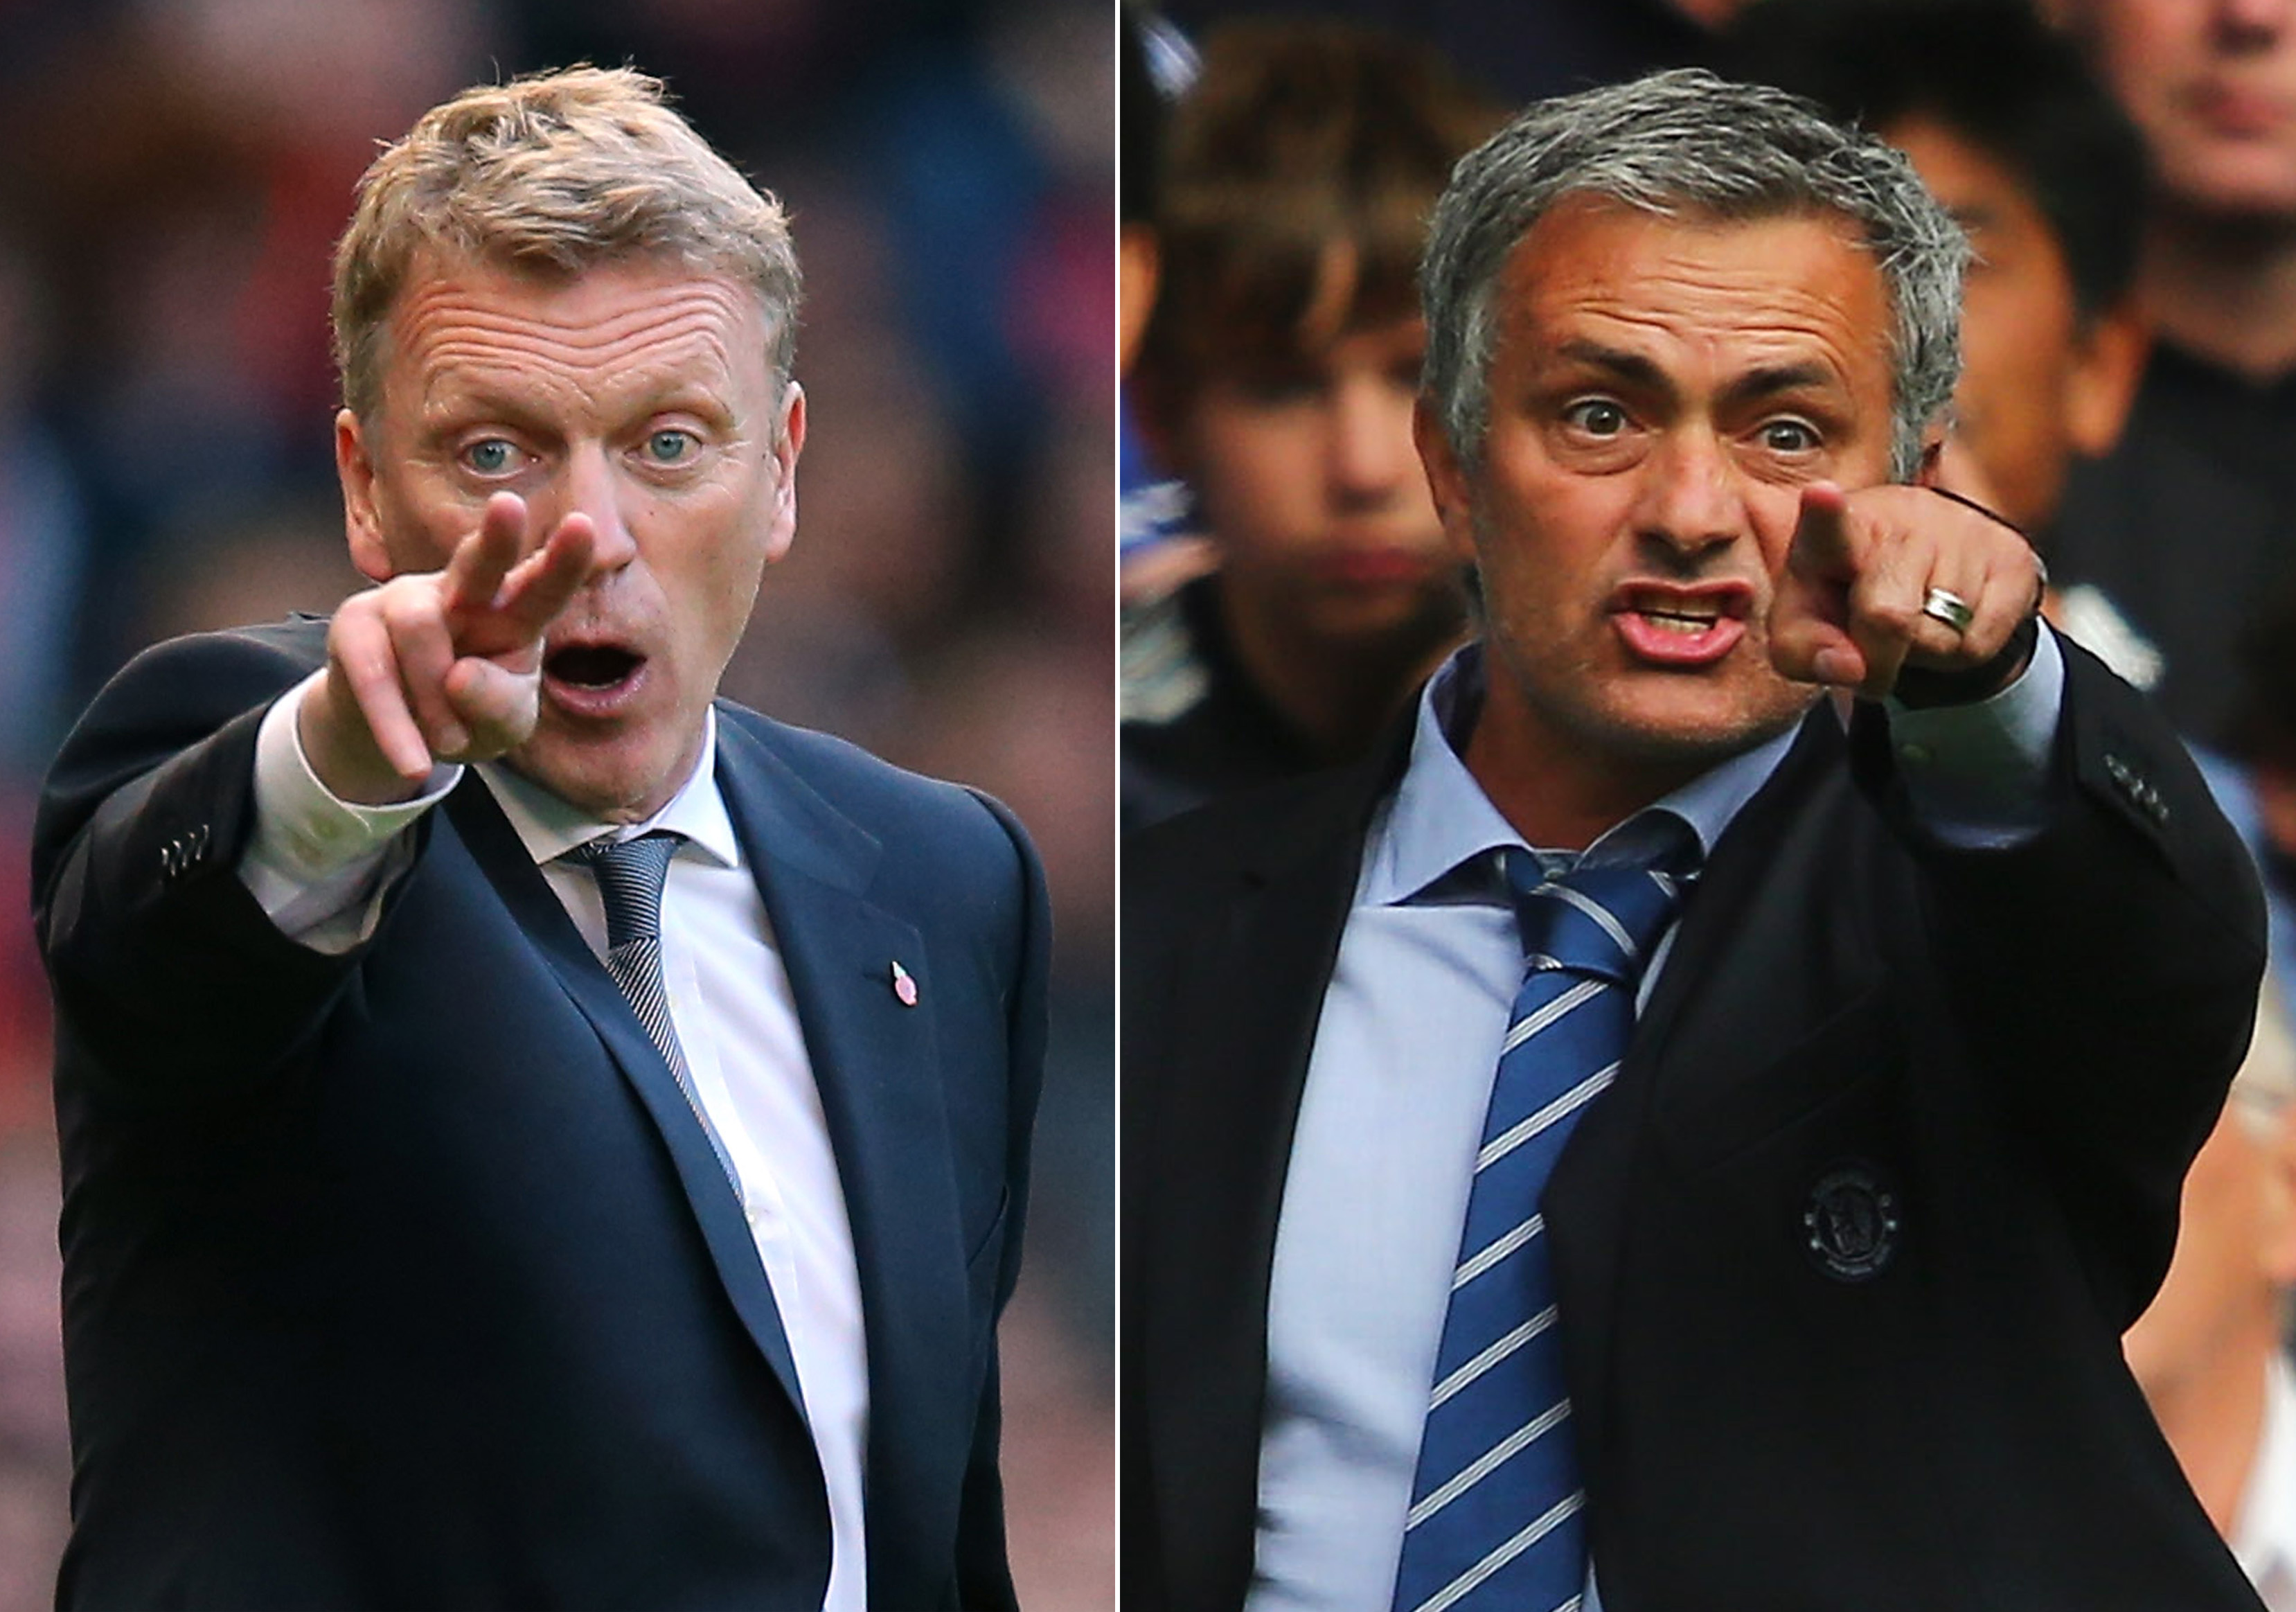 FILE PHOTO - EDITORS NOTE: COMPOSITE OF TWO IMAGES - Image Numbers 185933325 (L) and 176736916) In this composite image a comparison has been made between David Moyes, Manager of Manchester United (L) and Jose Mourinho, Manager of Chelsea. Chelsea and Manchester United meet at Stamford Bridge, London on January 19, 2014. ***LEFT IMAGE*** MANCHESTER, ENGLAND - OCTOBER 26: David Moyes the manager of Manchester United reacts during the Barclays Premier League match between Manchester United and Stoke City at Old Trafford on October 26, 2013 in Manchester, England. (Photo by Alex Livesey/Getty Images) ***RIGHT IMAGE***  LONDON, ENGLAND - AUGUST 18: Chelsea manager Jose Mourinho gives instructions during the Barclays Premier League match between Chelsea and Hull City at Stamford Bridge on August 18, 2013 in London, England. (Photo by Clive Mason/Getty Images)